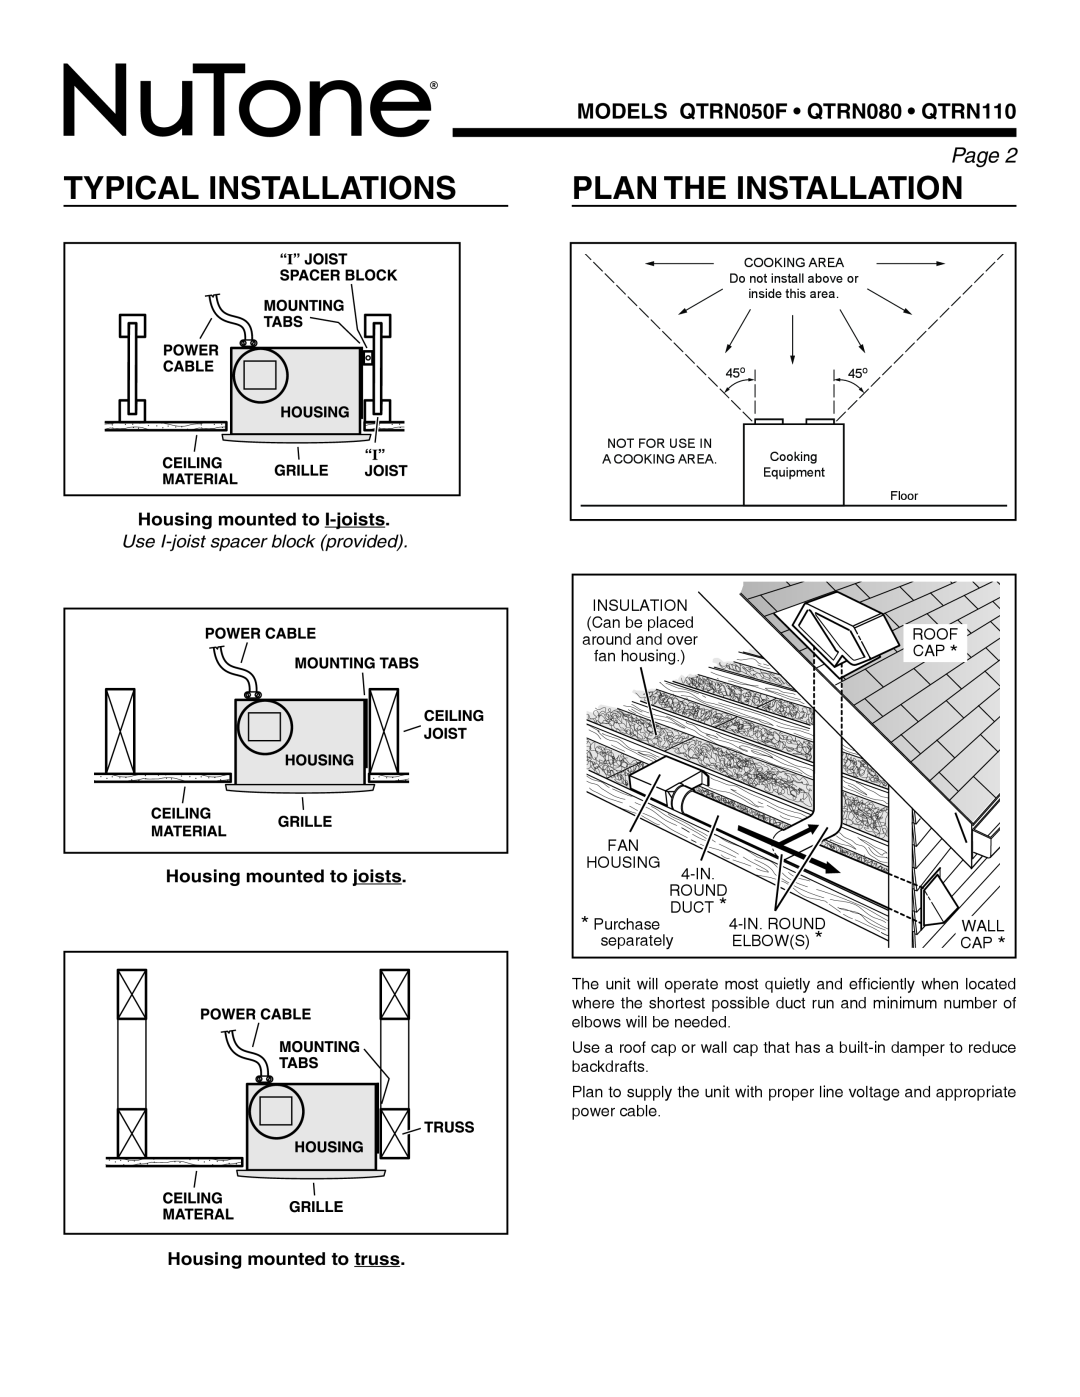 NuTone QTRN080 Typical Installations, Plan The Installation, Page , Housing mounted to I-joists, Housing mounted to truss 